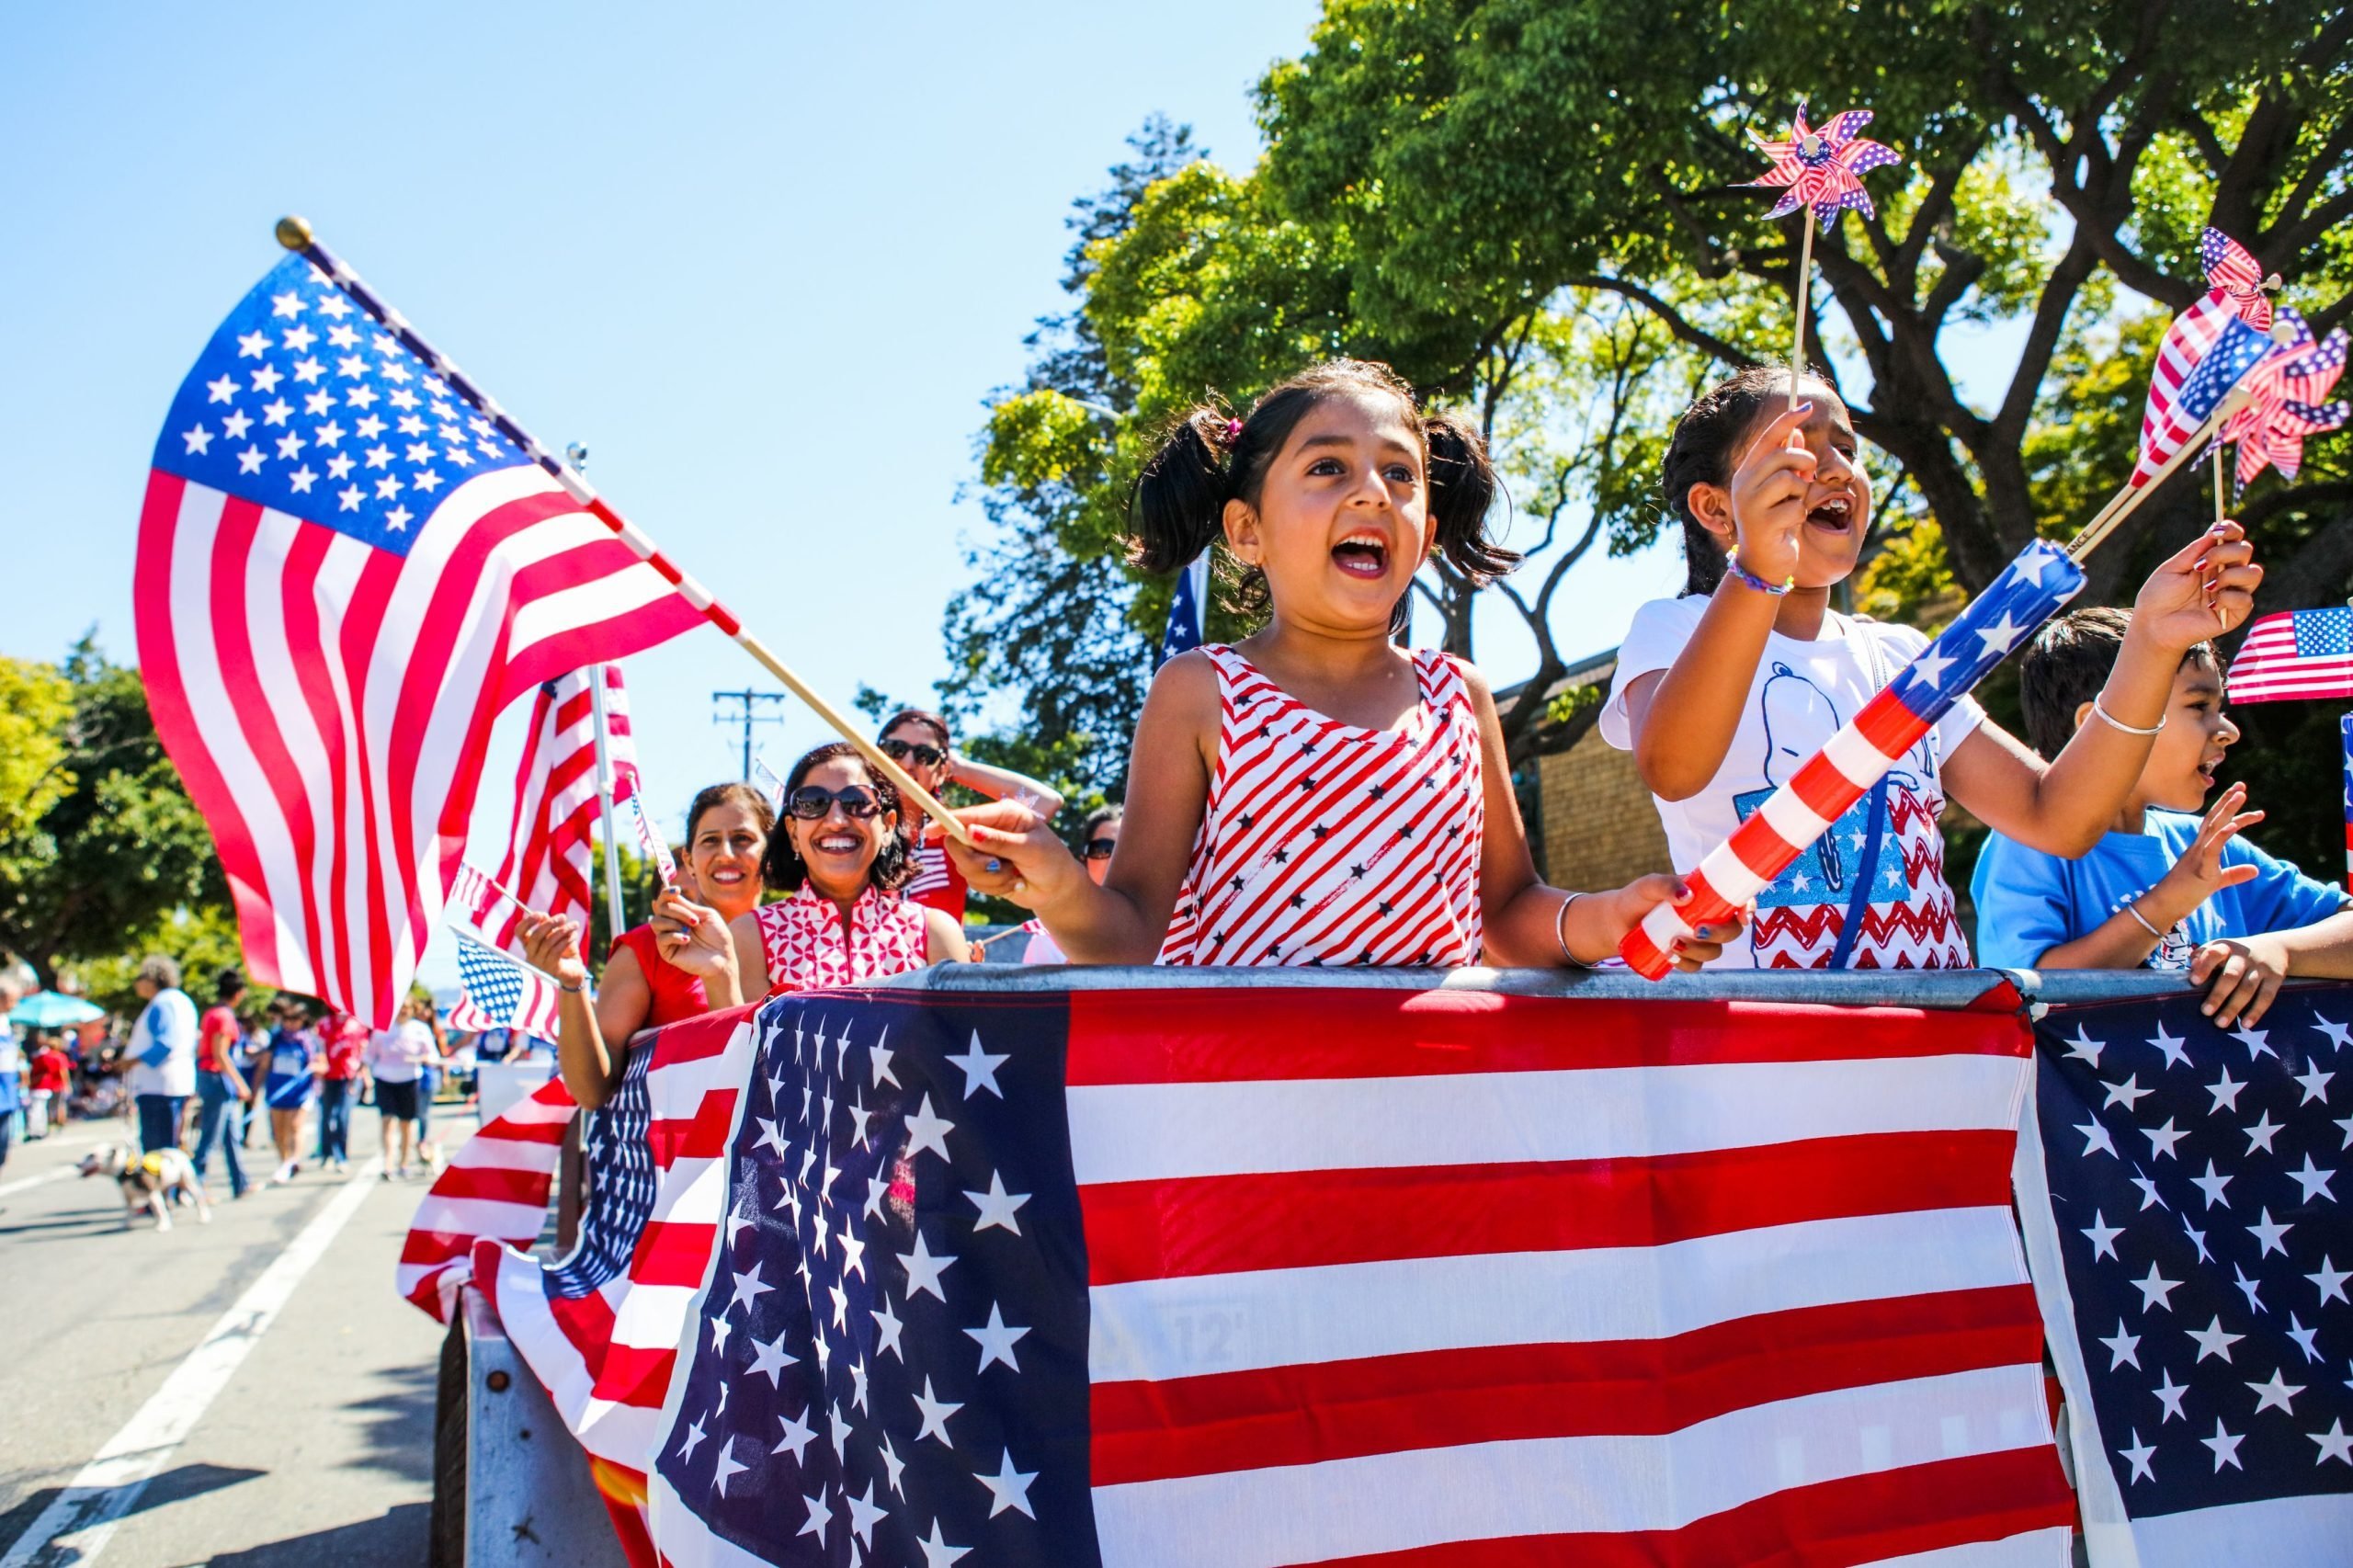 People wave American flags as they ride through 4th of July Parade in Alameda, California on Monday, July 4, 2016.